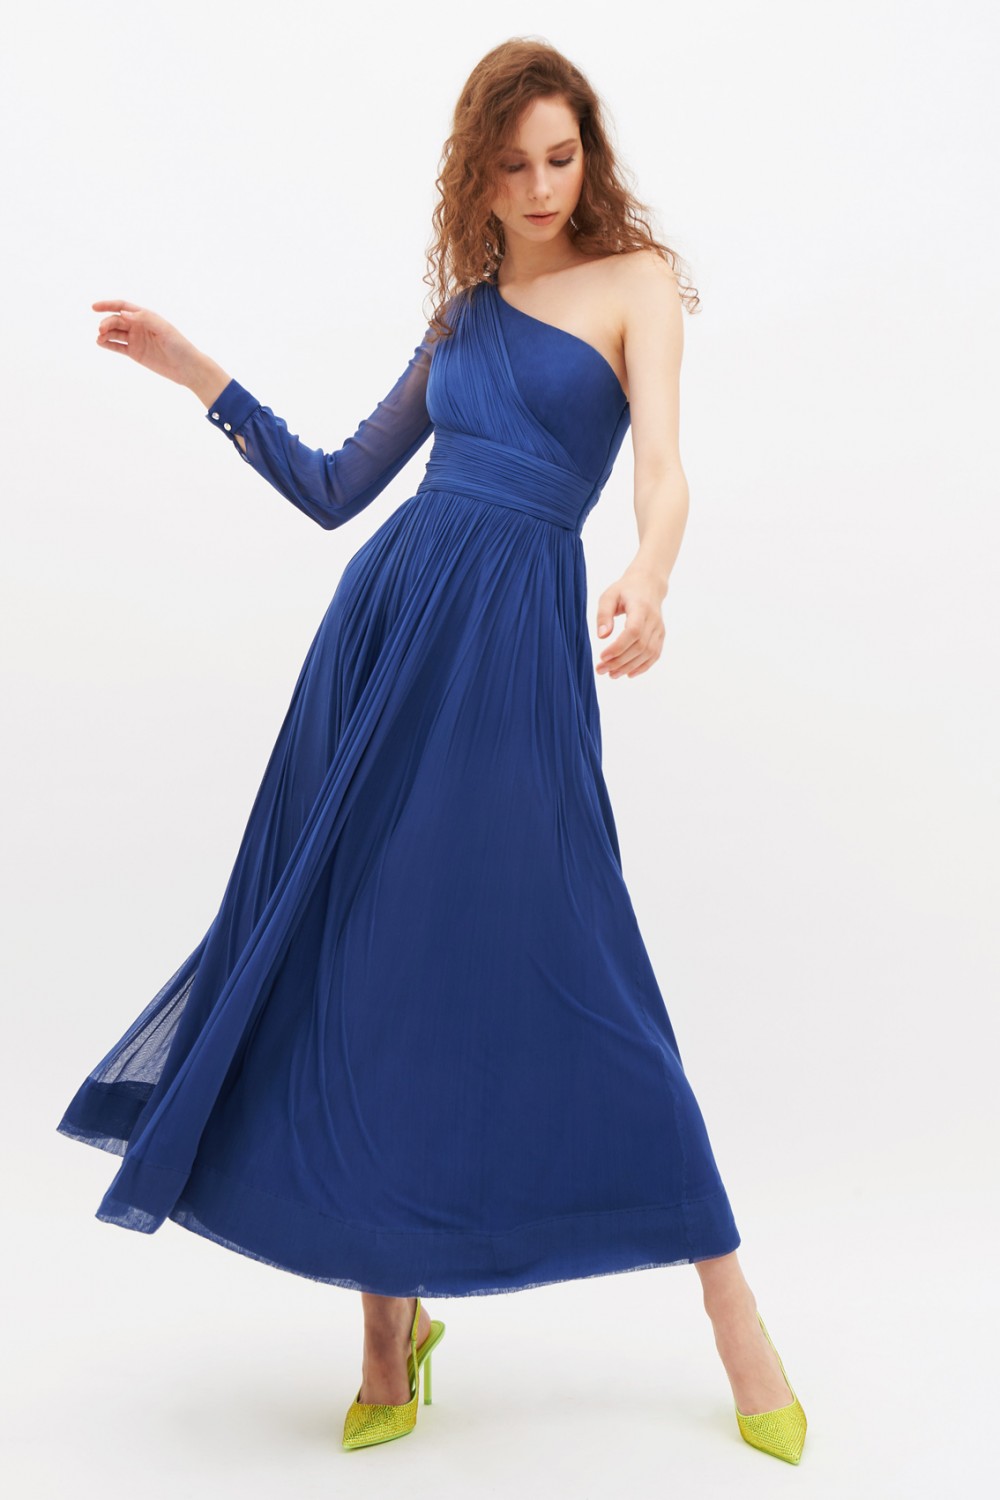 One-shoulder blue dress with long sleeve